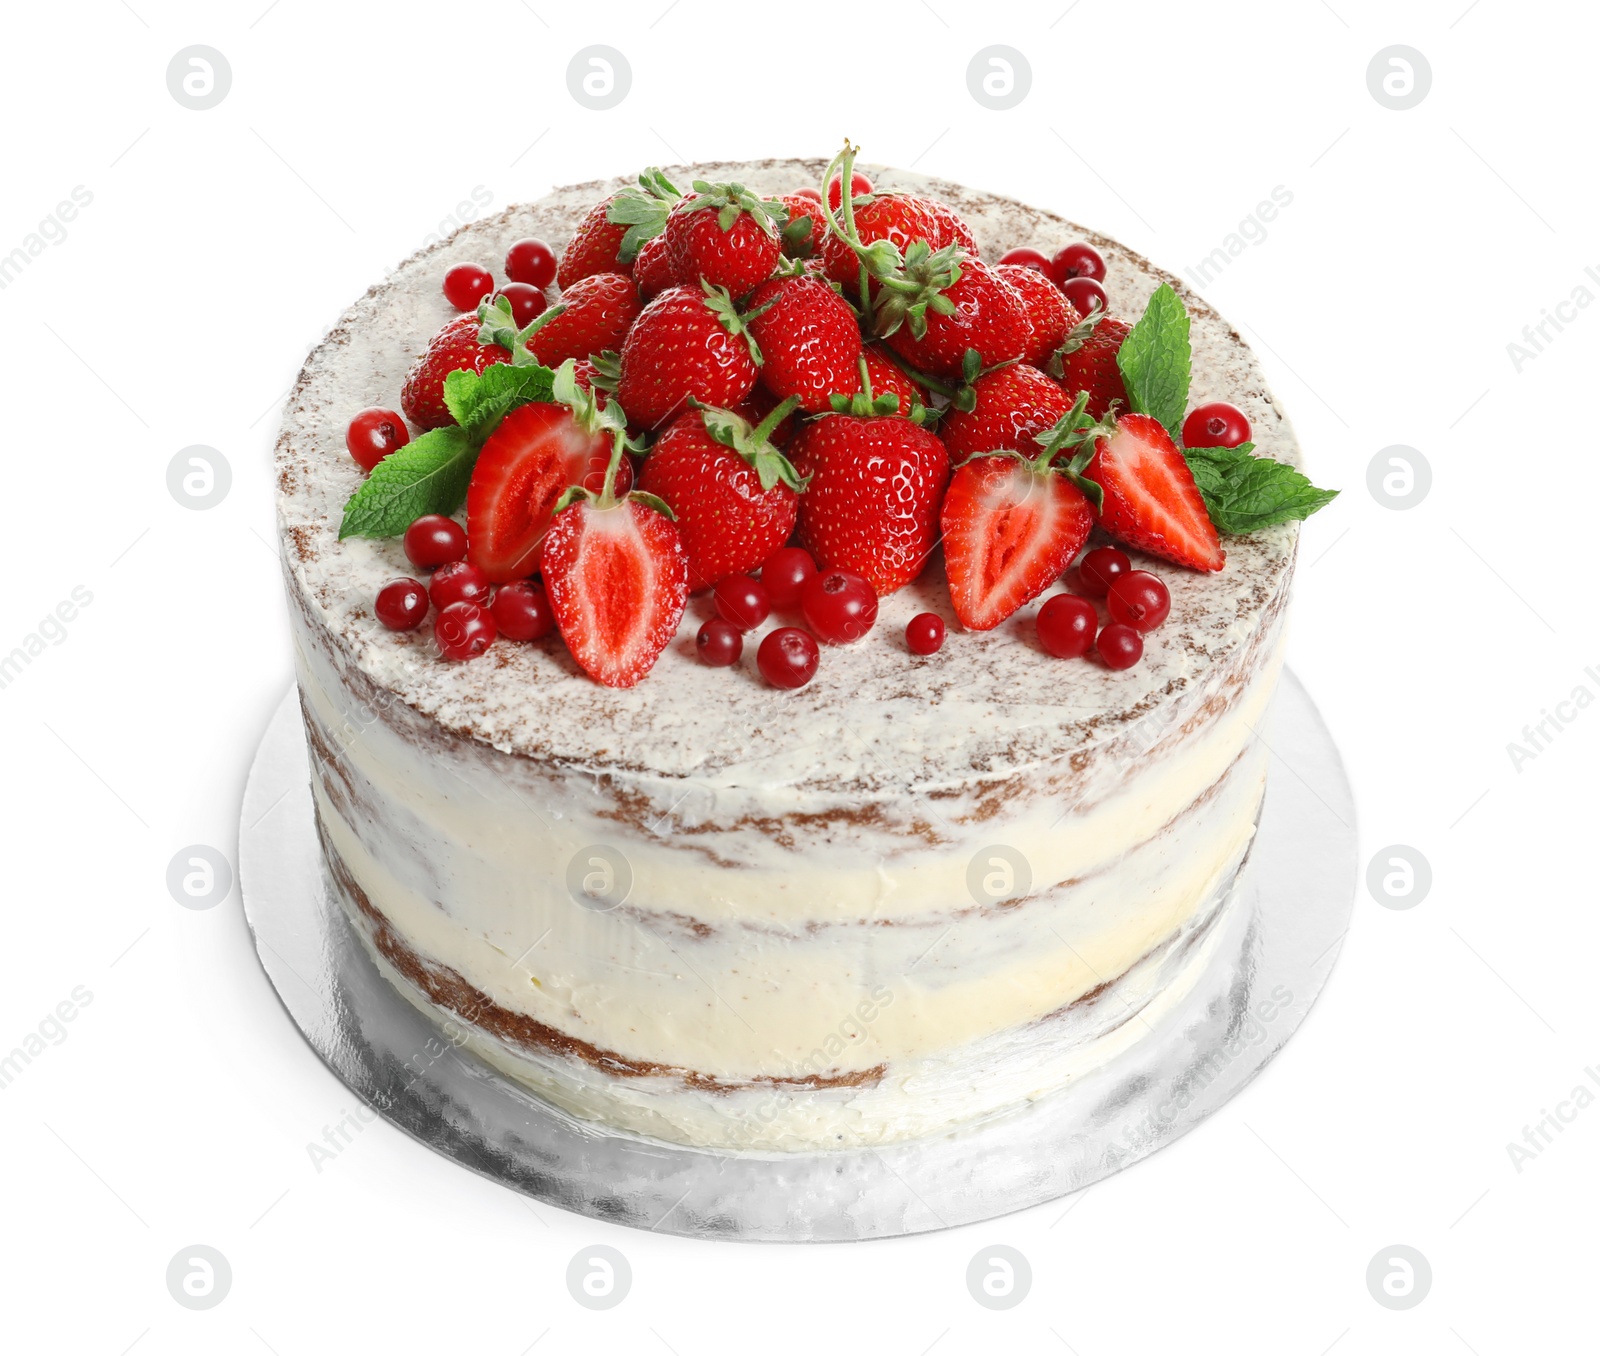 Photo of Delicious homemade cake with fresh berries on white background